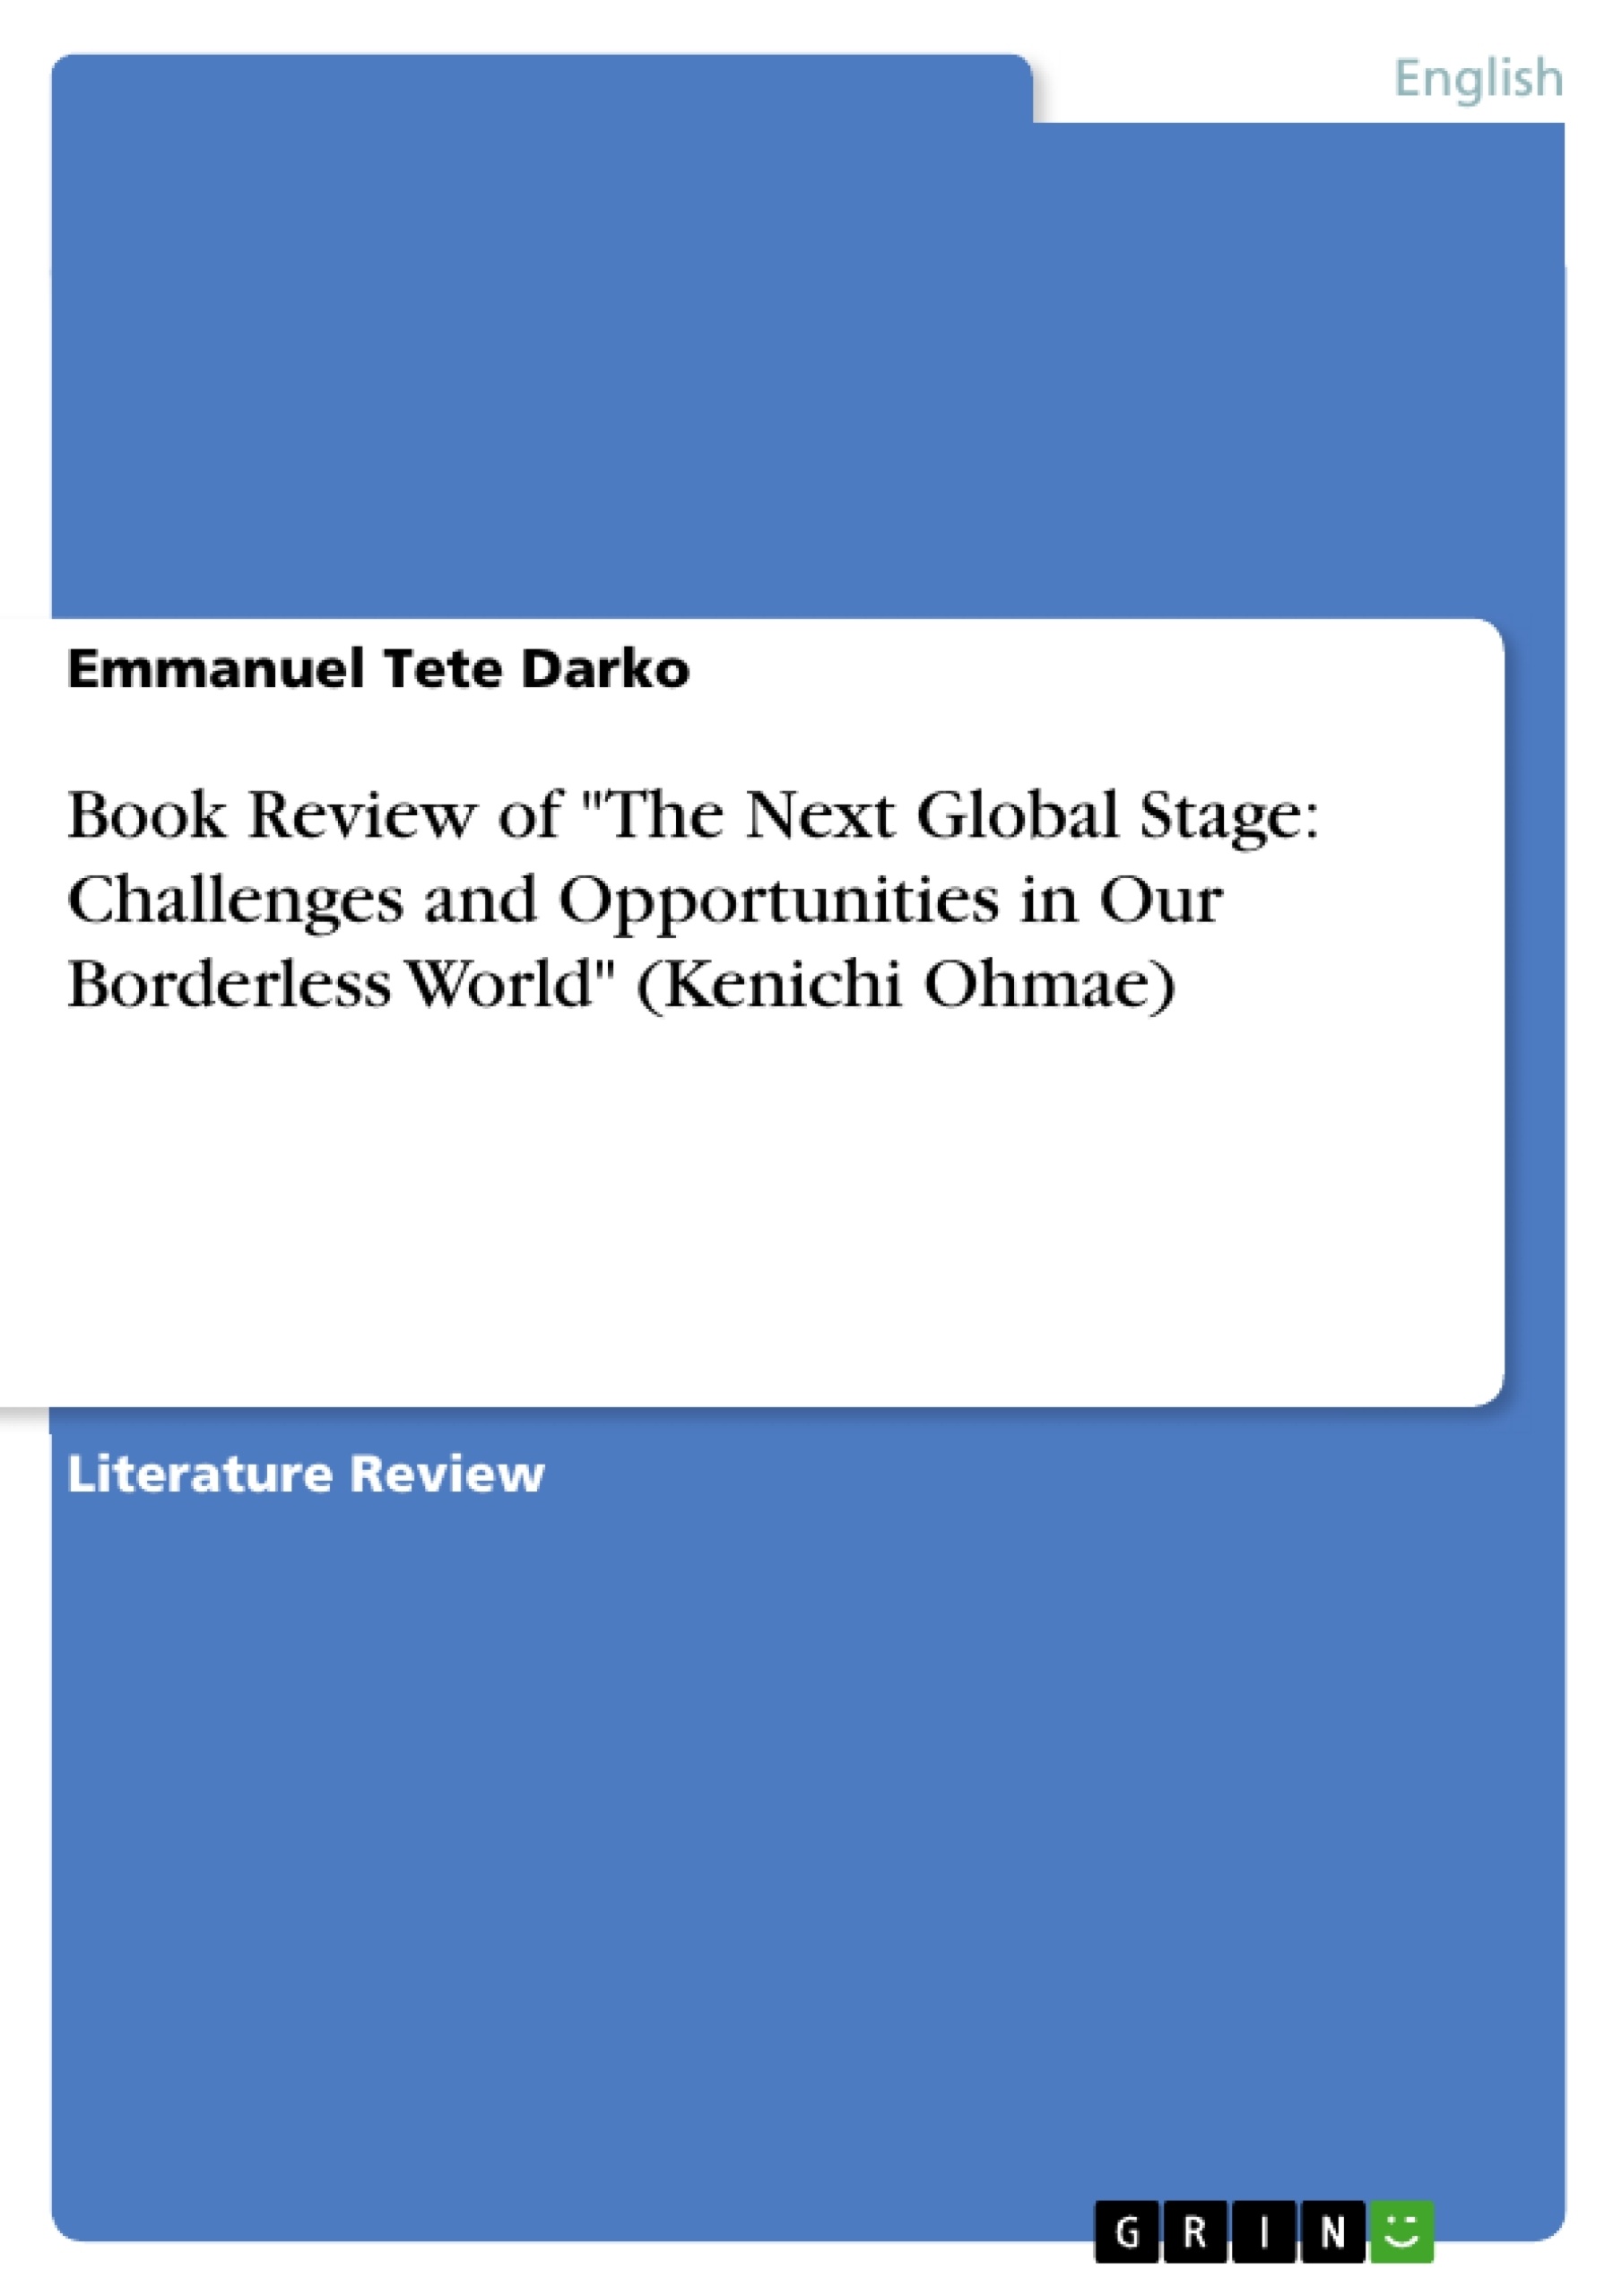 Titel: Book Review of "The Next Global Stage: Challenges and Opportunities in Our Borderless World" (Kenichi Ohmae)